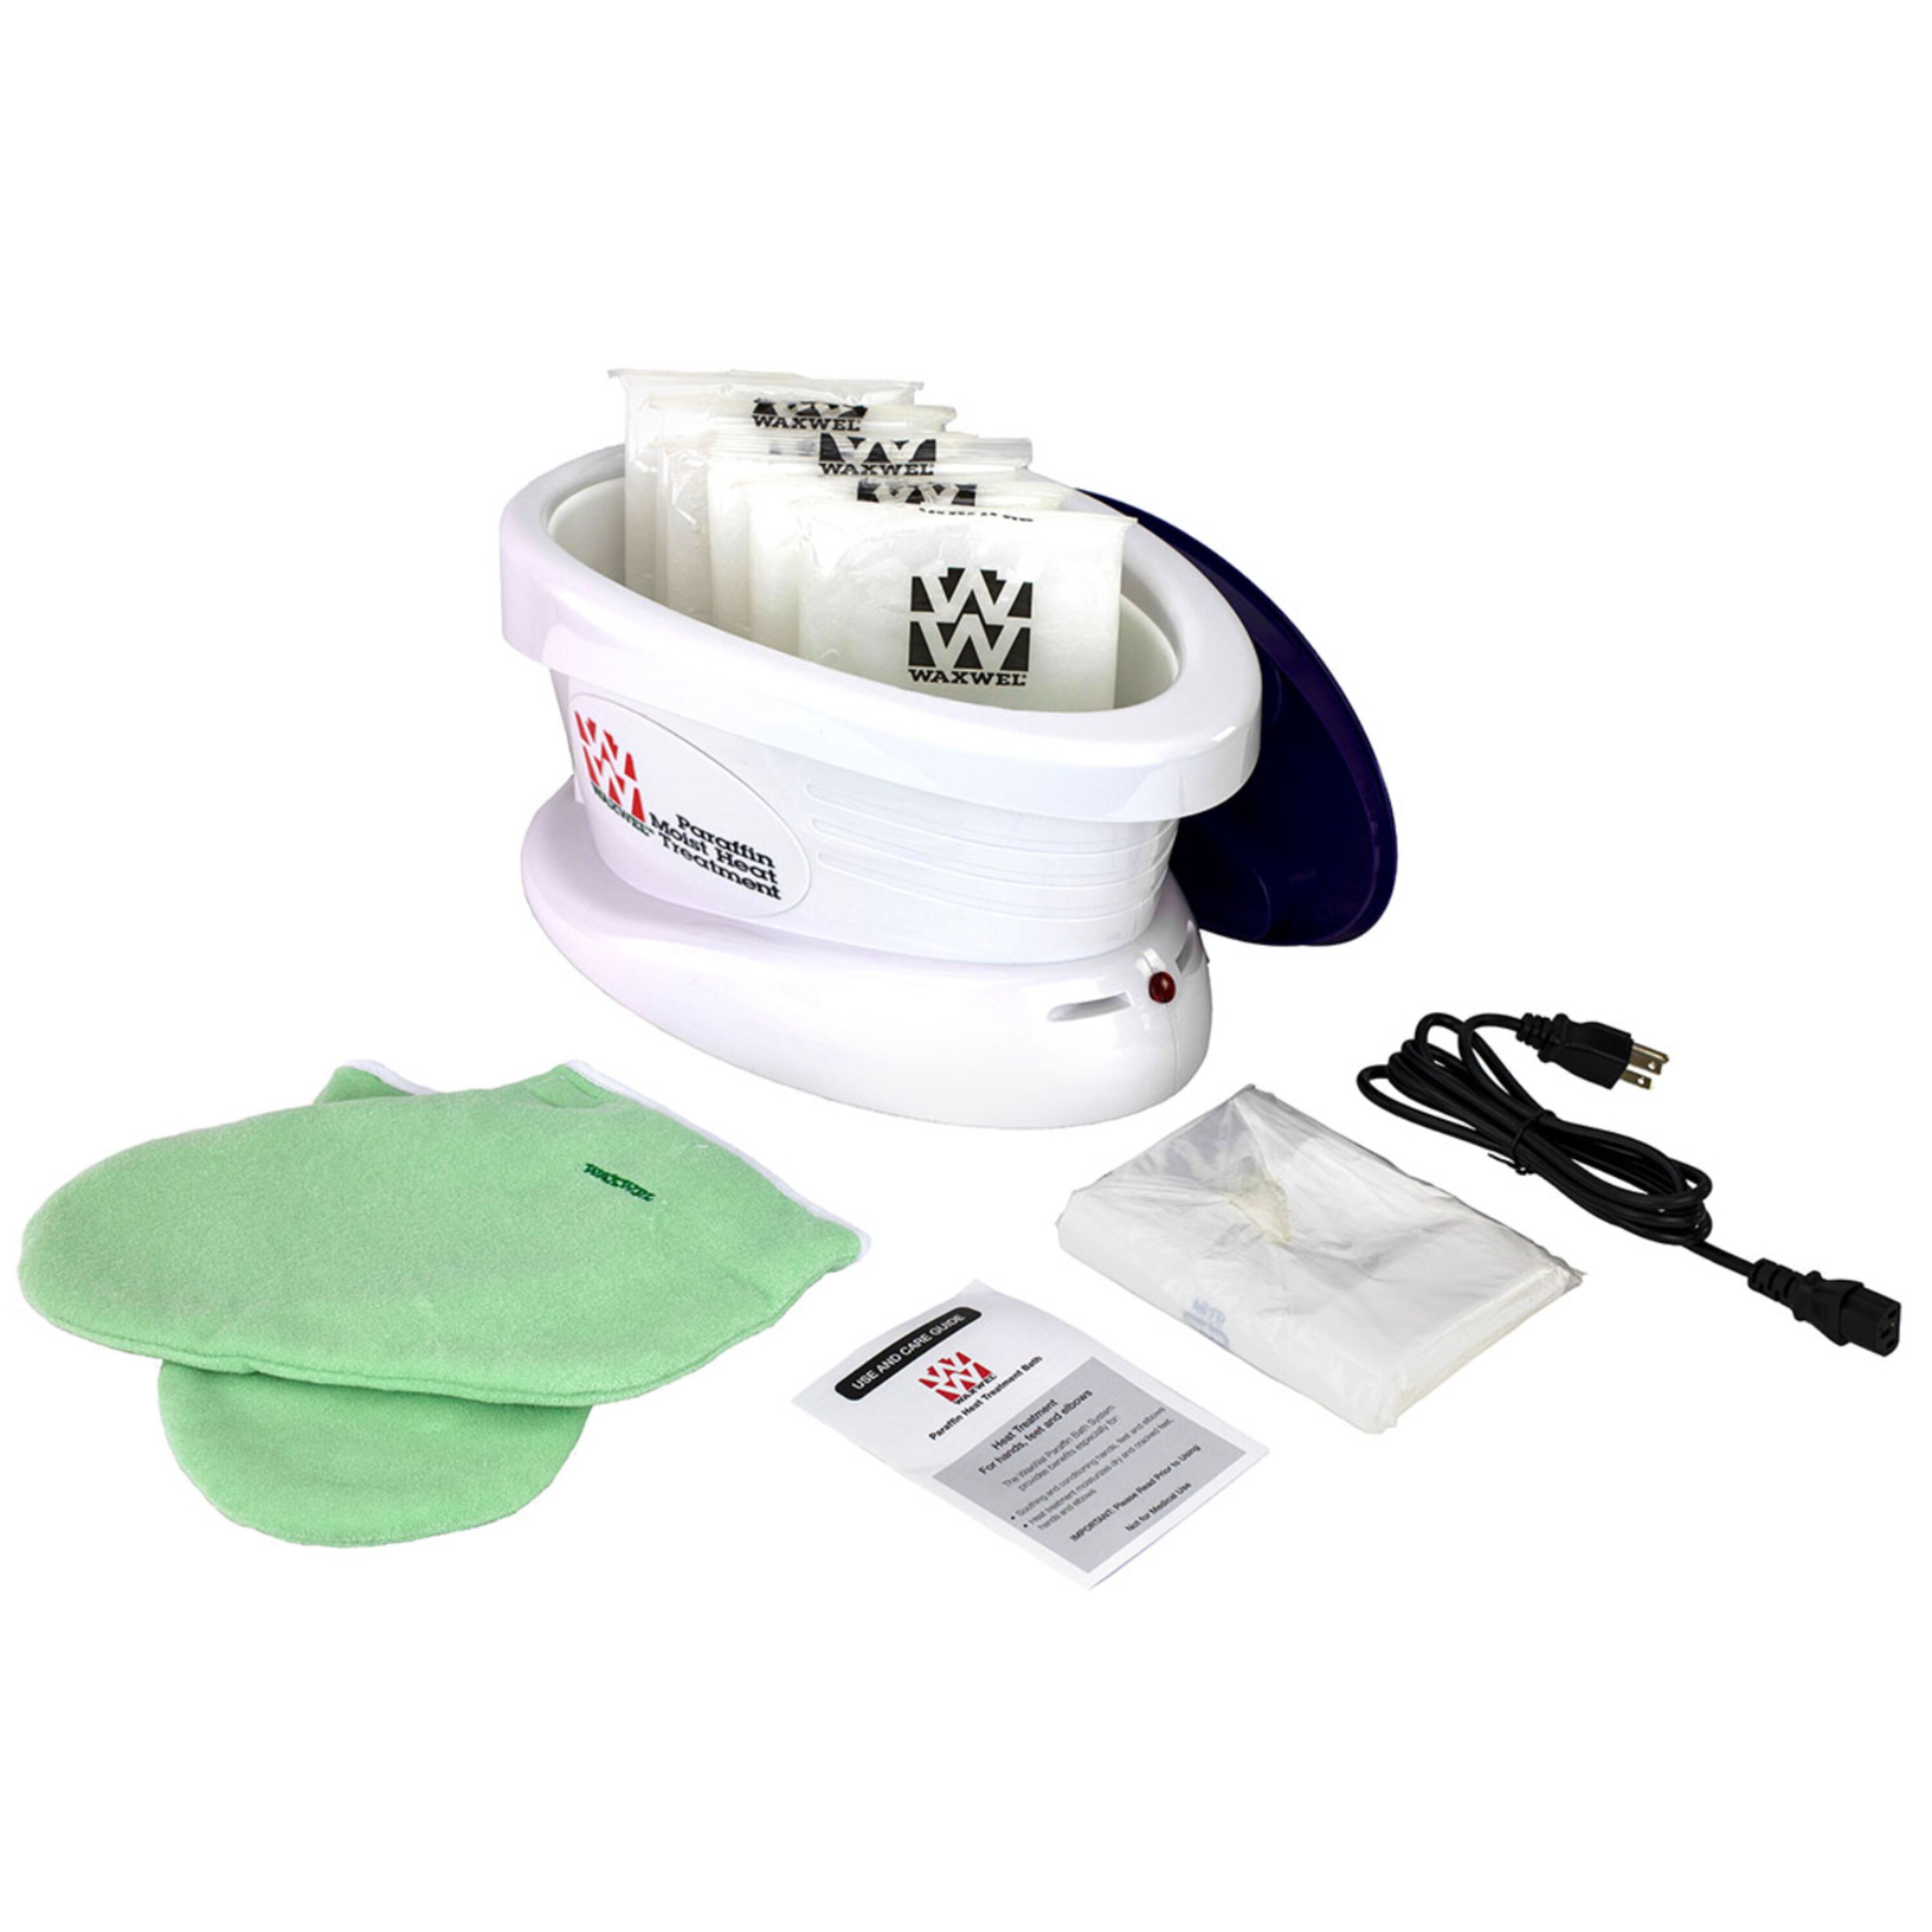 WaxWel Paraffin Bath Set With Heating Tank, Terry Cloth Mitt And Bootie, Liners, And Wax Blocks , CVS